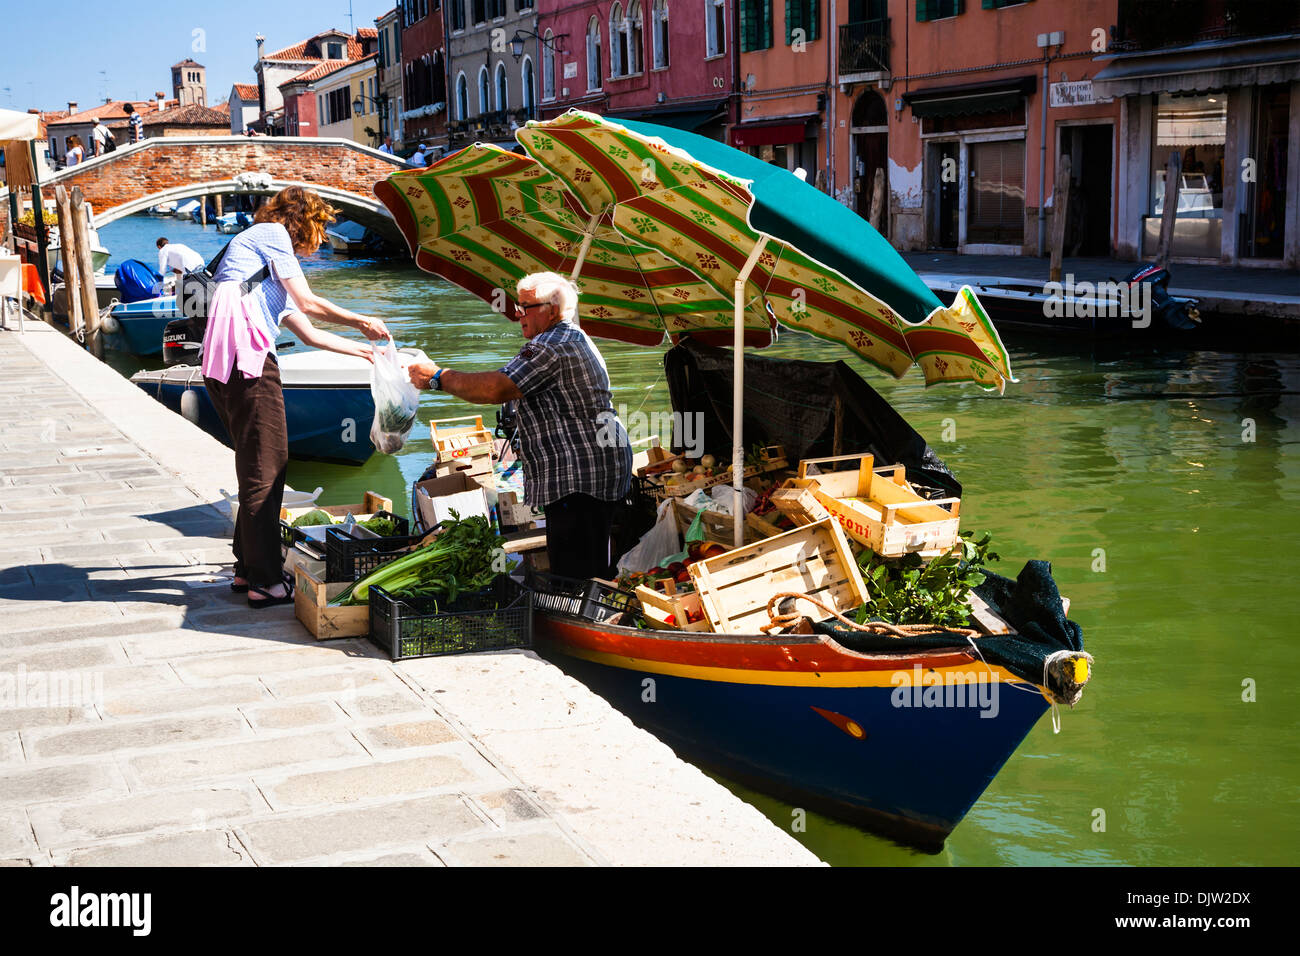 Man selling fruit and vegetables from a boat on a canal, Murano, Venice, Veneto, Italy Stock Photo